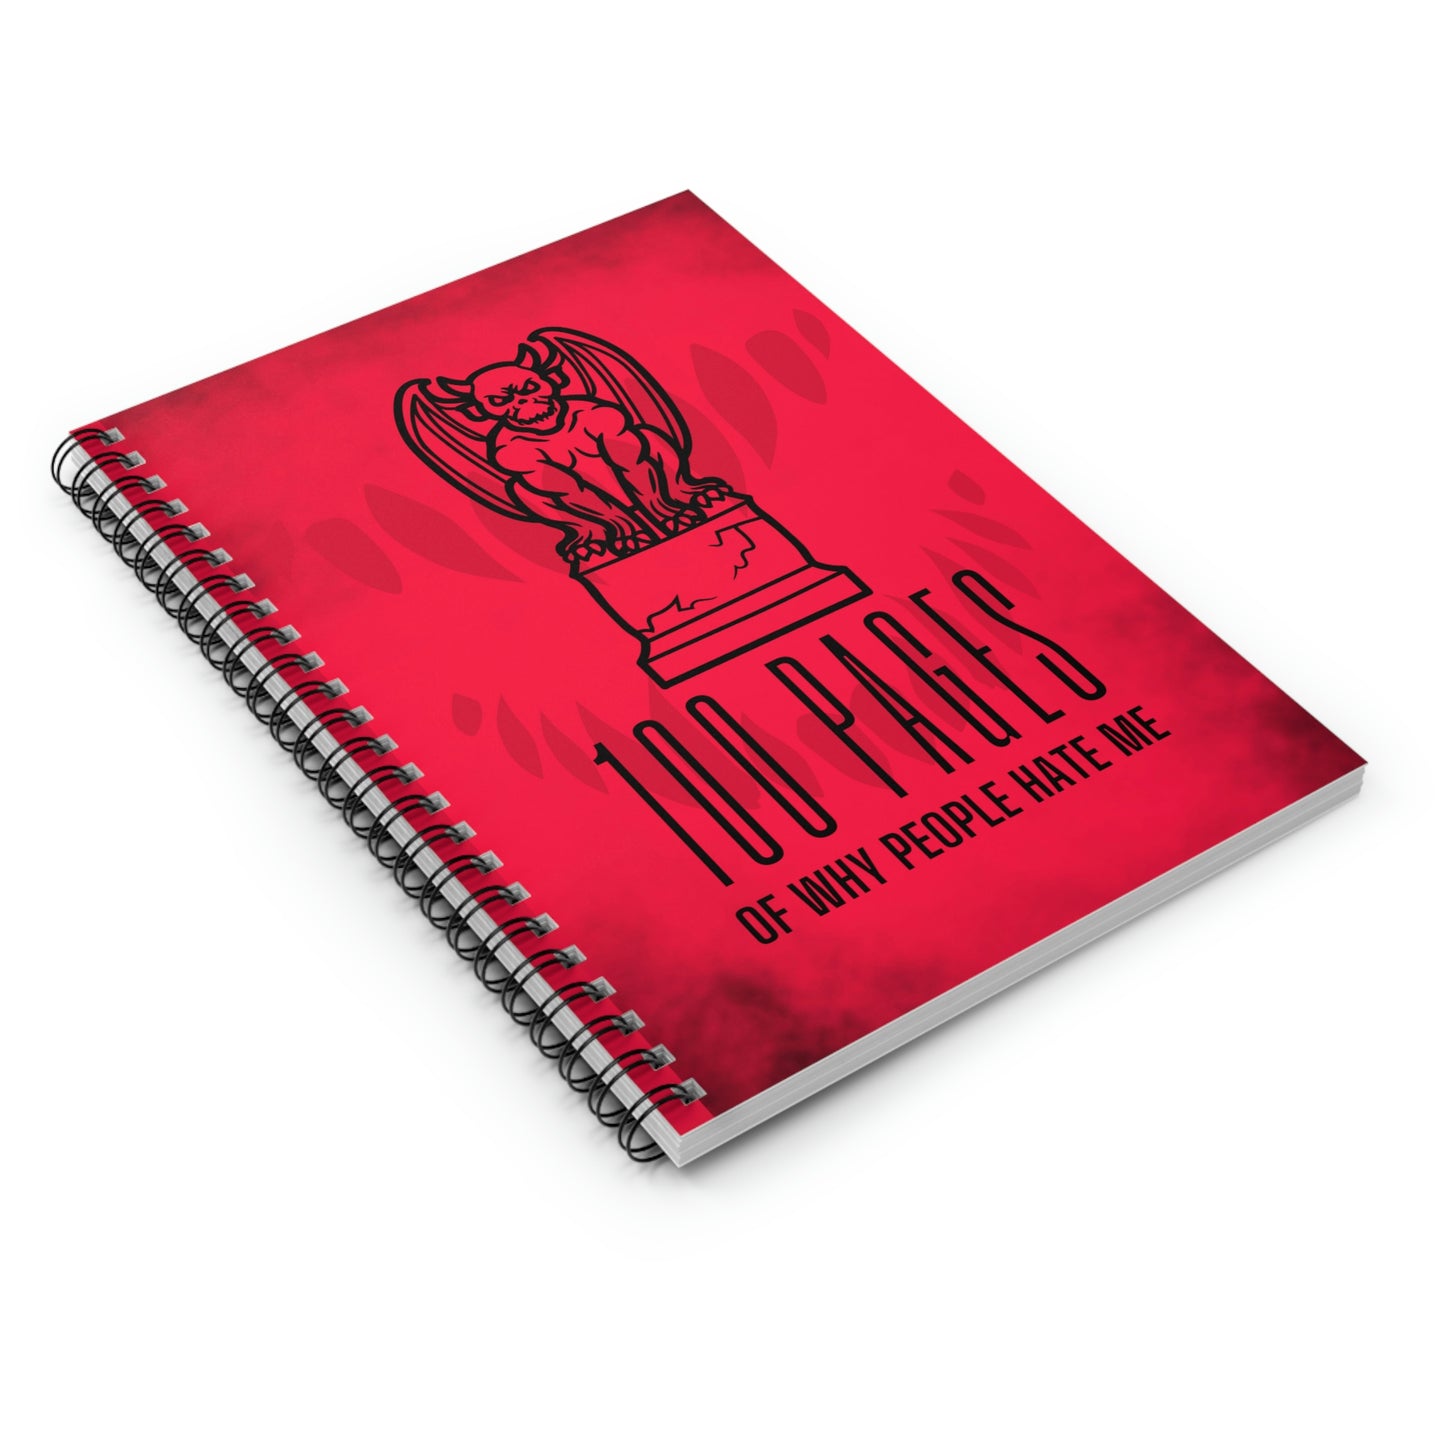 People Hate Me Spiral Notebook - Ruled Line